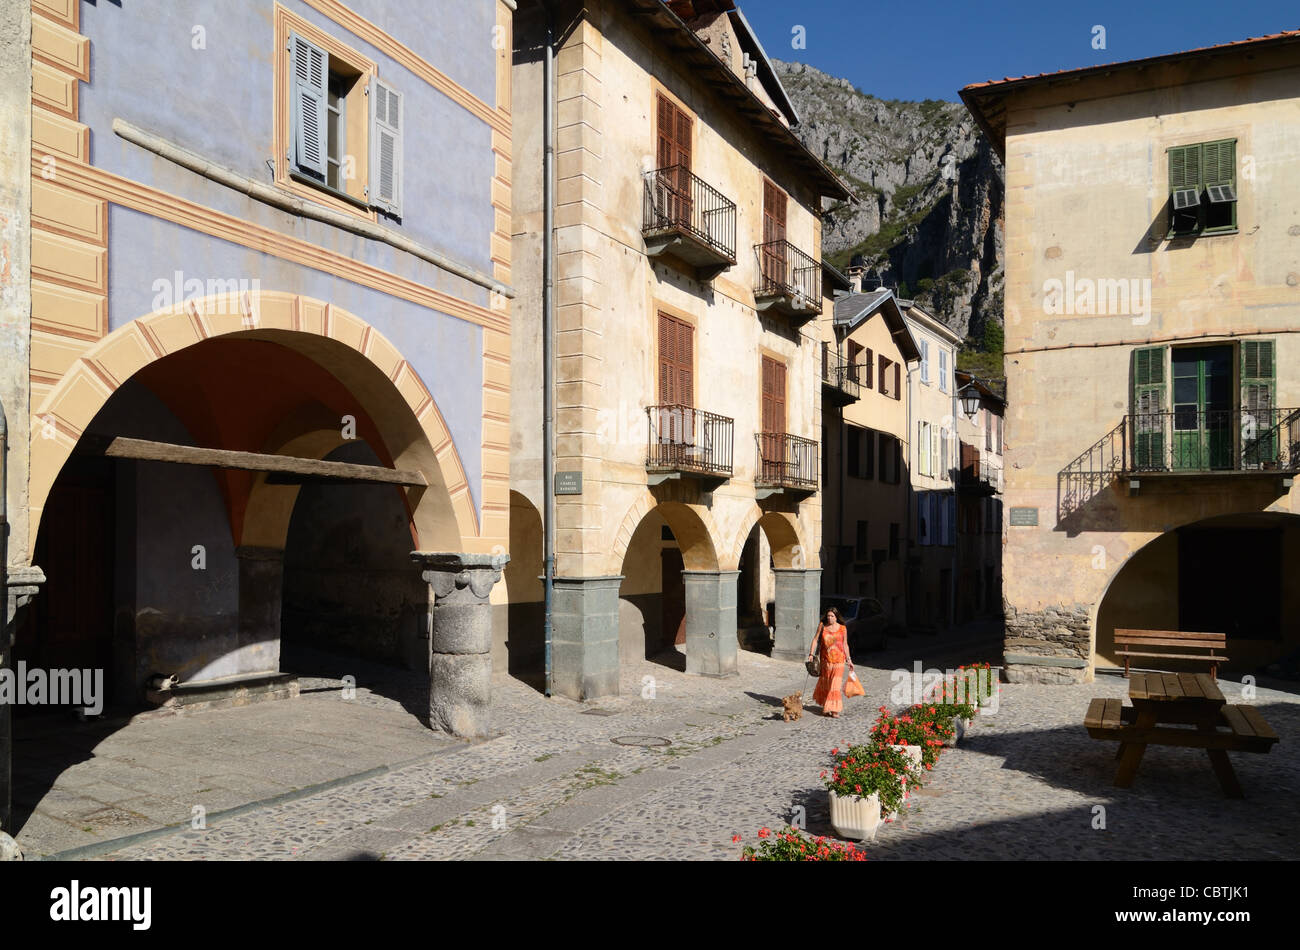 Woman Walking Dog & Street Scene with Arcades, Village Houses and Town Square, La Brigue, Roya Valley, Alpes-Maritimes, France Stockfoto